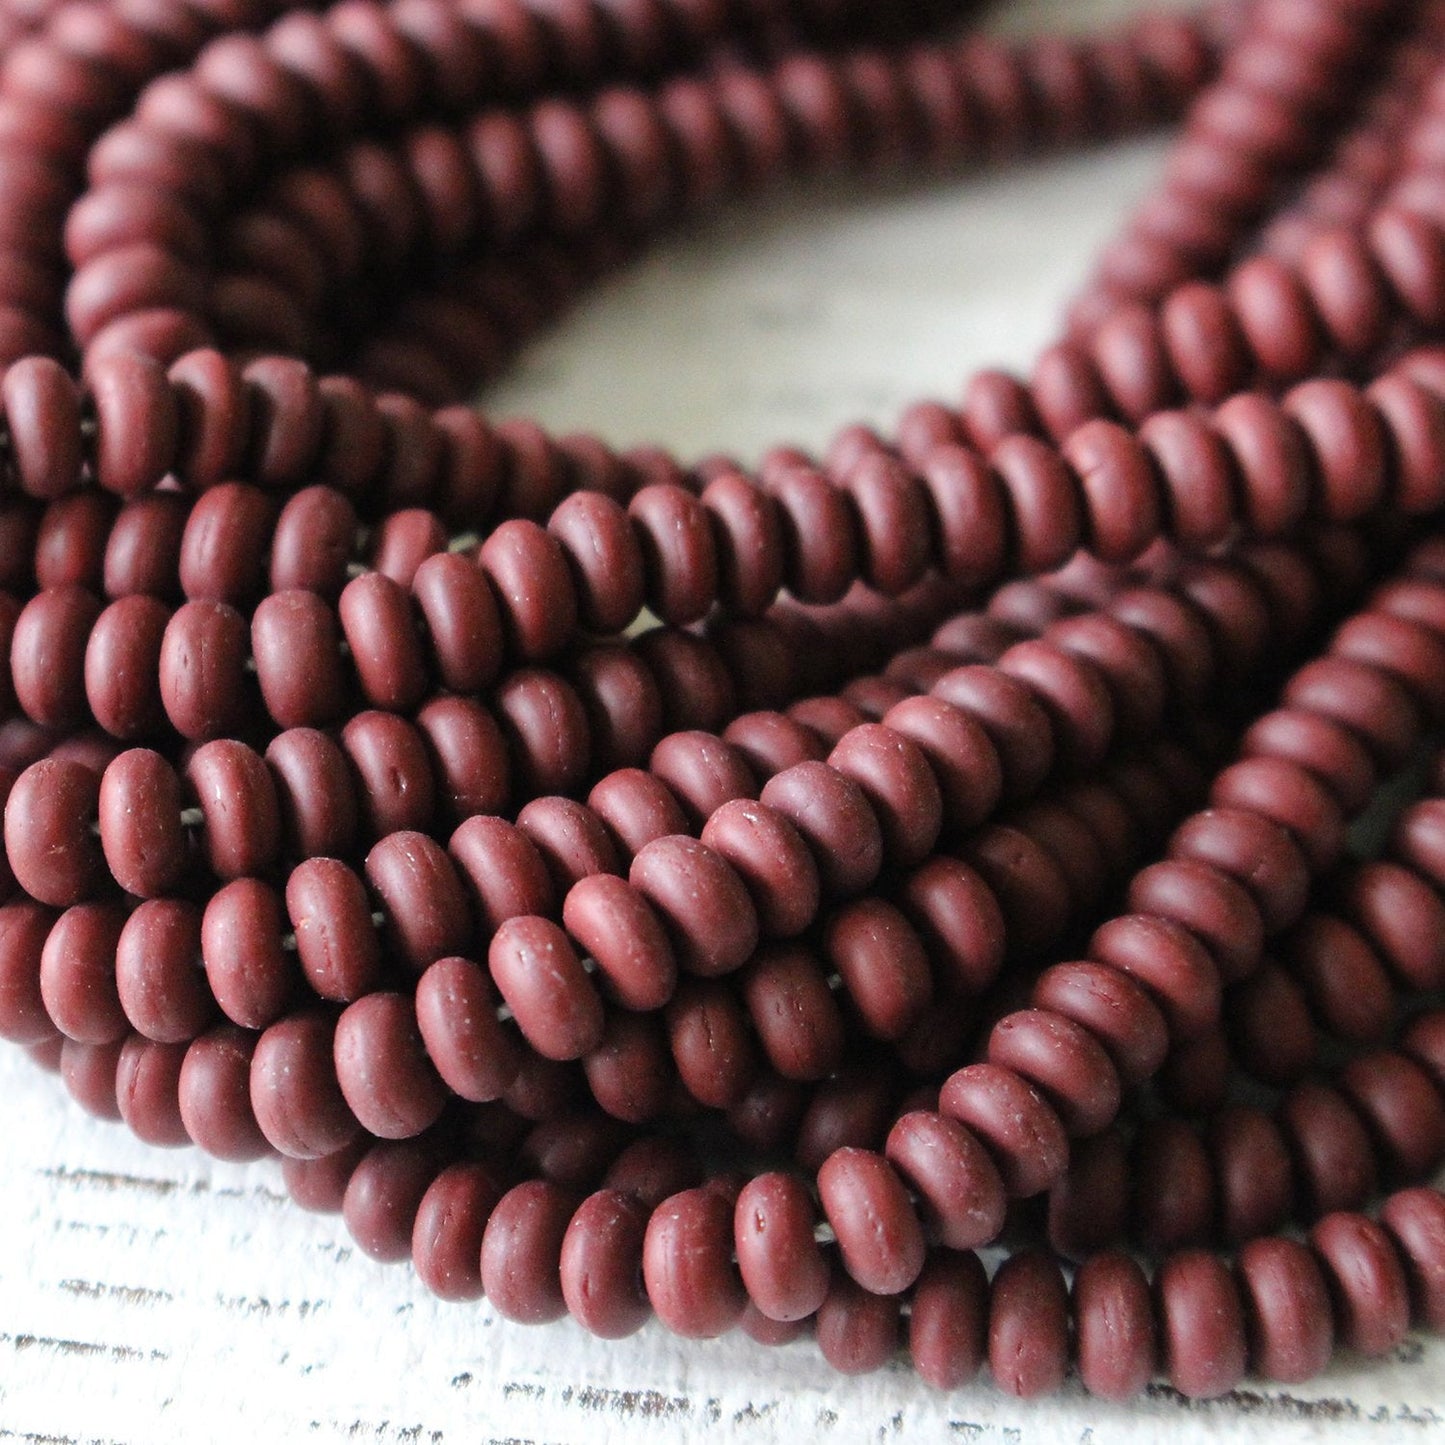 4mm Rondelle Beads - Chocolate Brown - 100 Beads